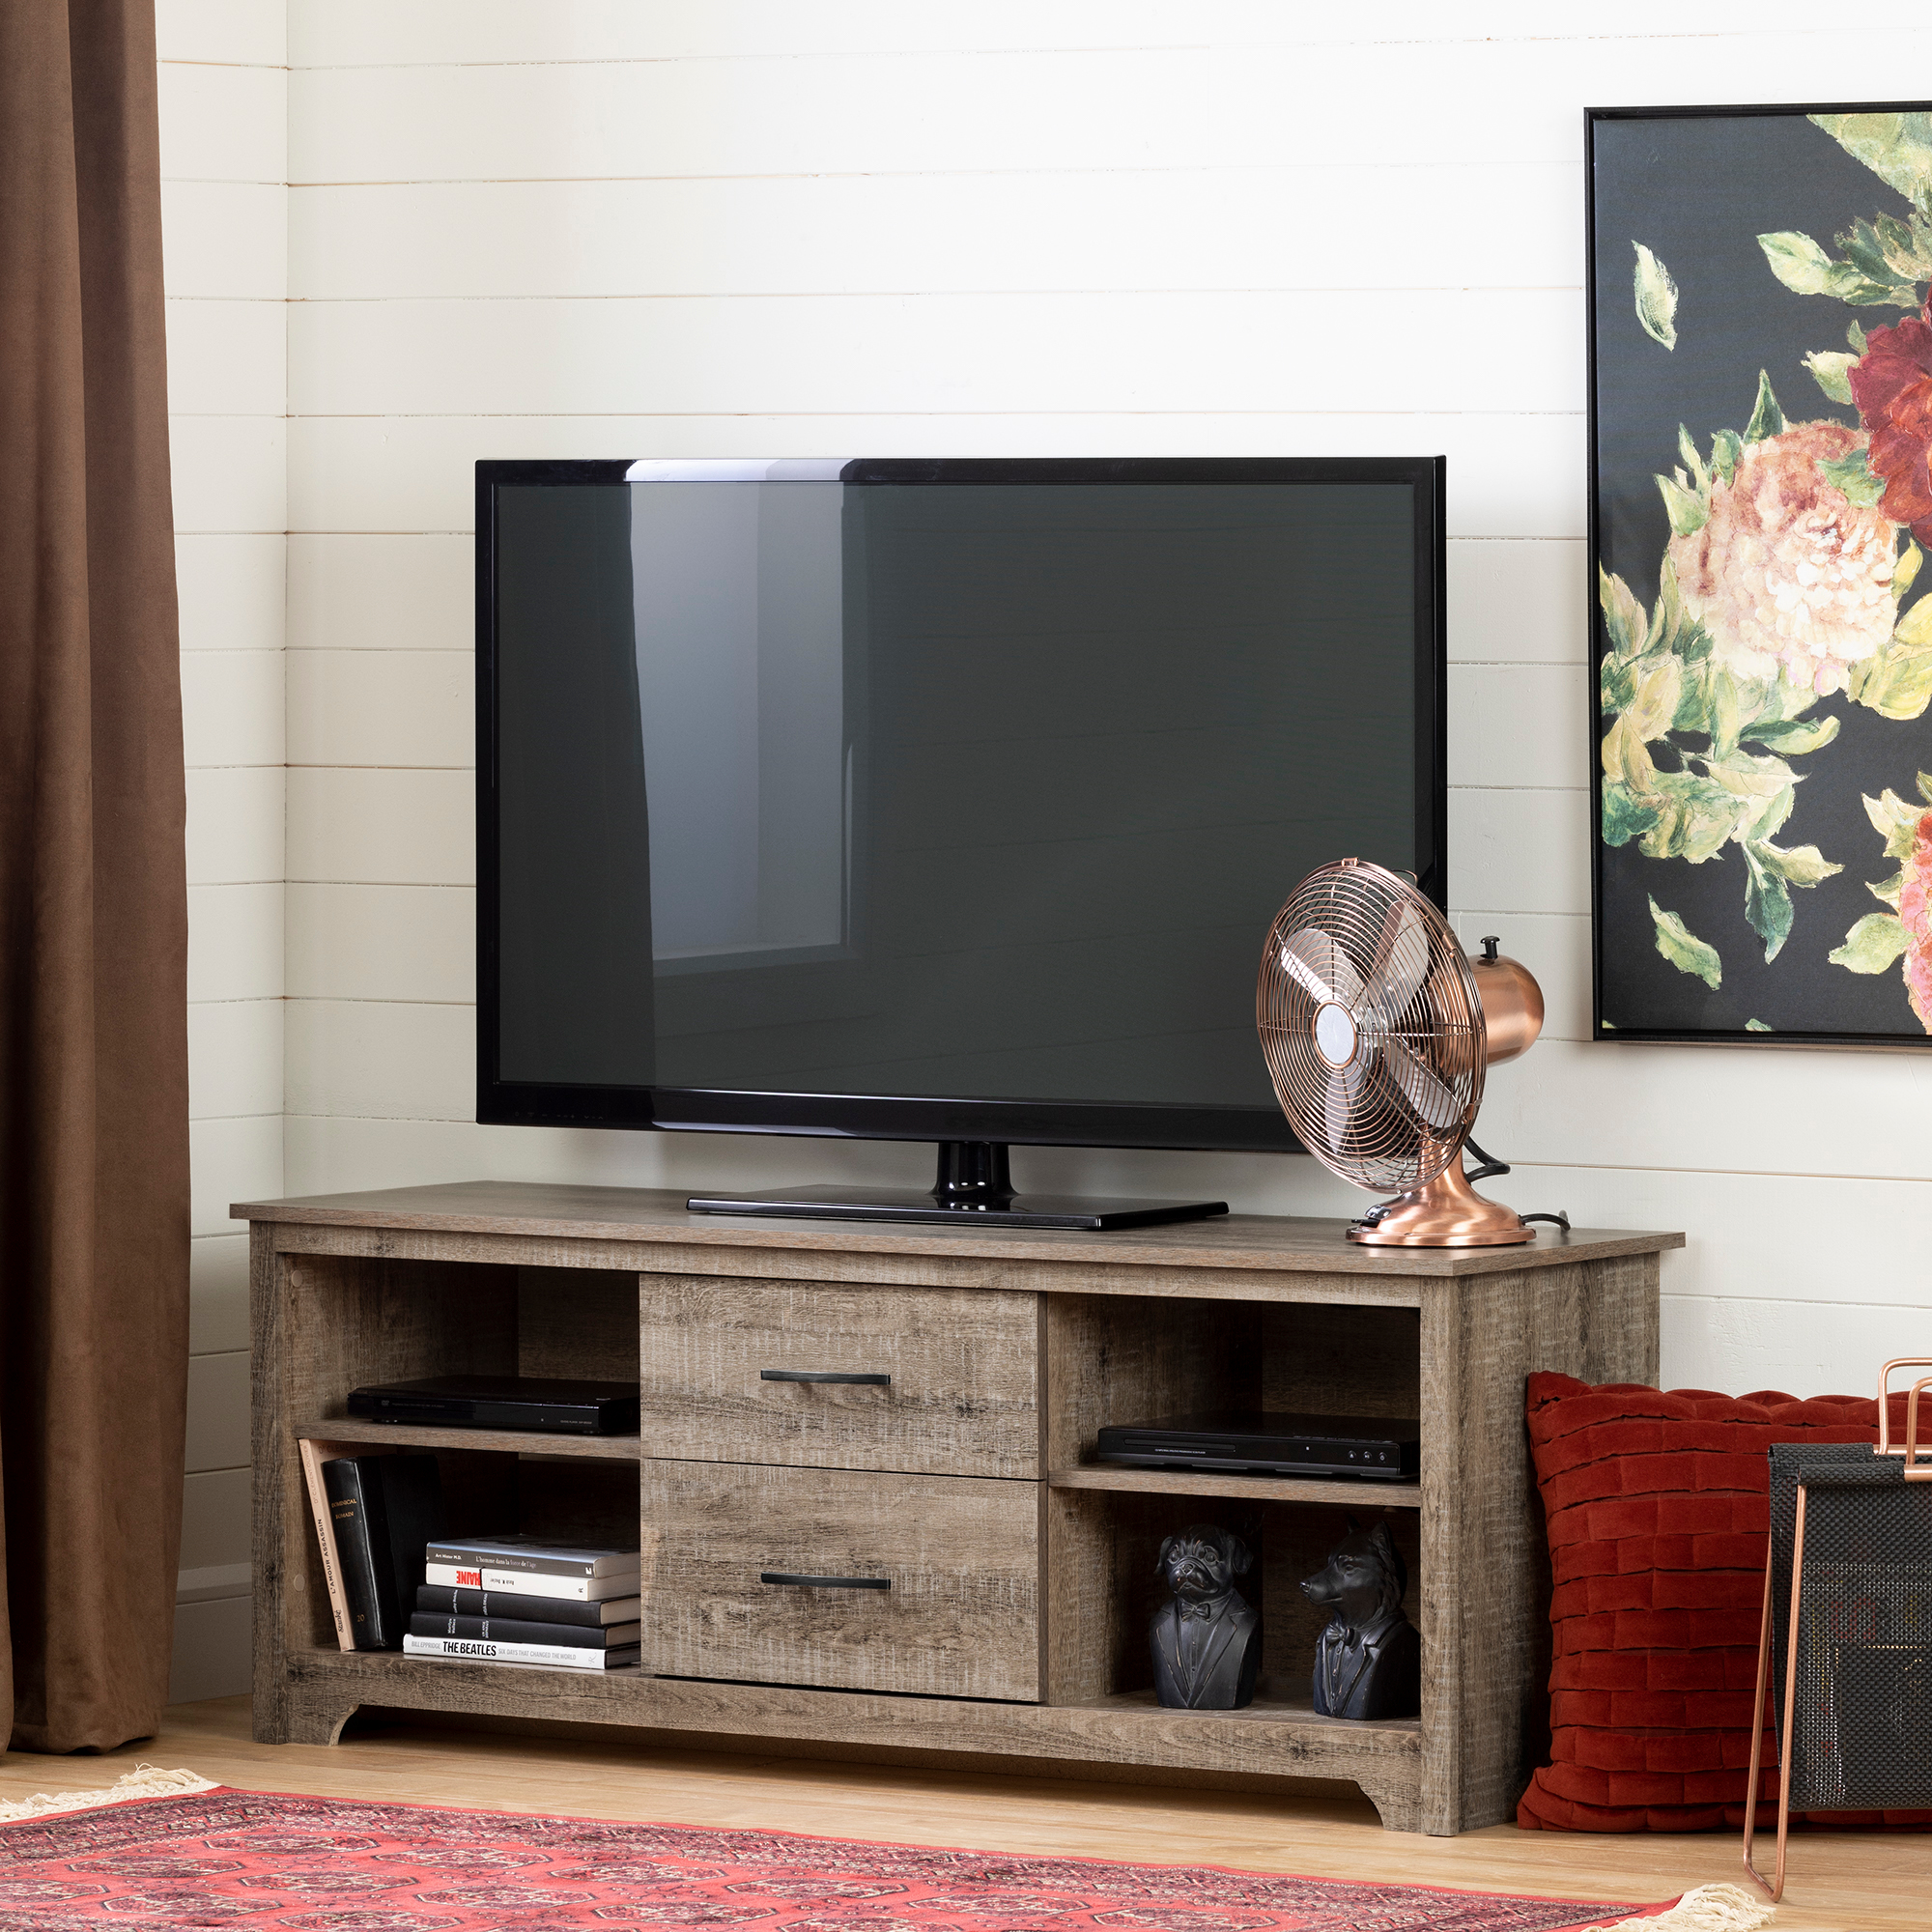 South Shore Fusion TV Stand with Drawers for TVs up to 60"- Weathered Oak